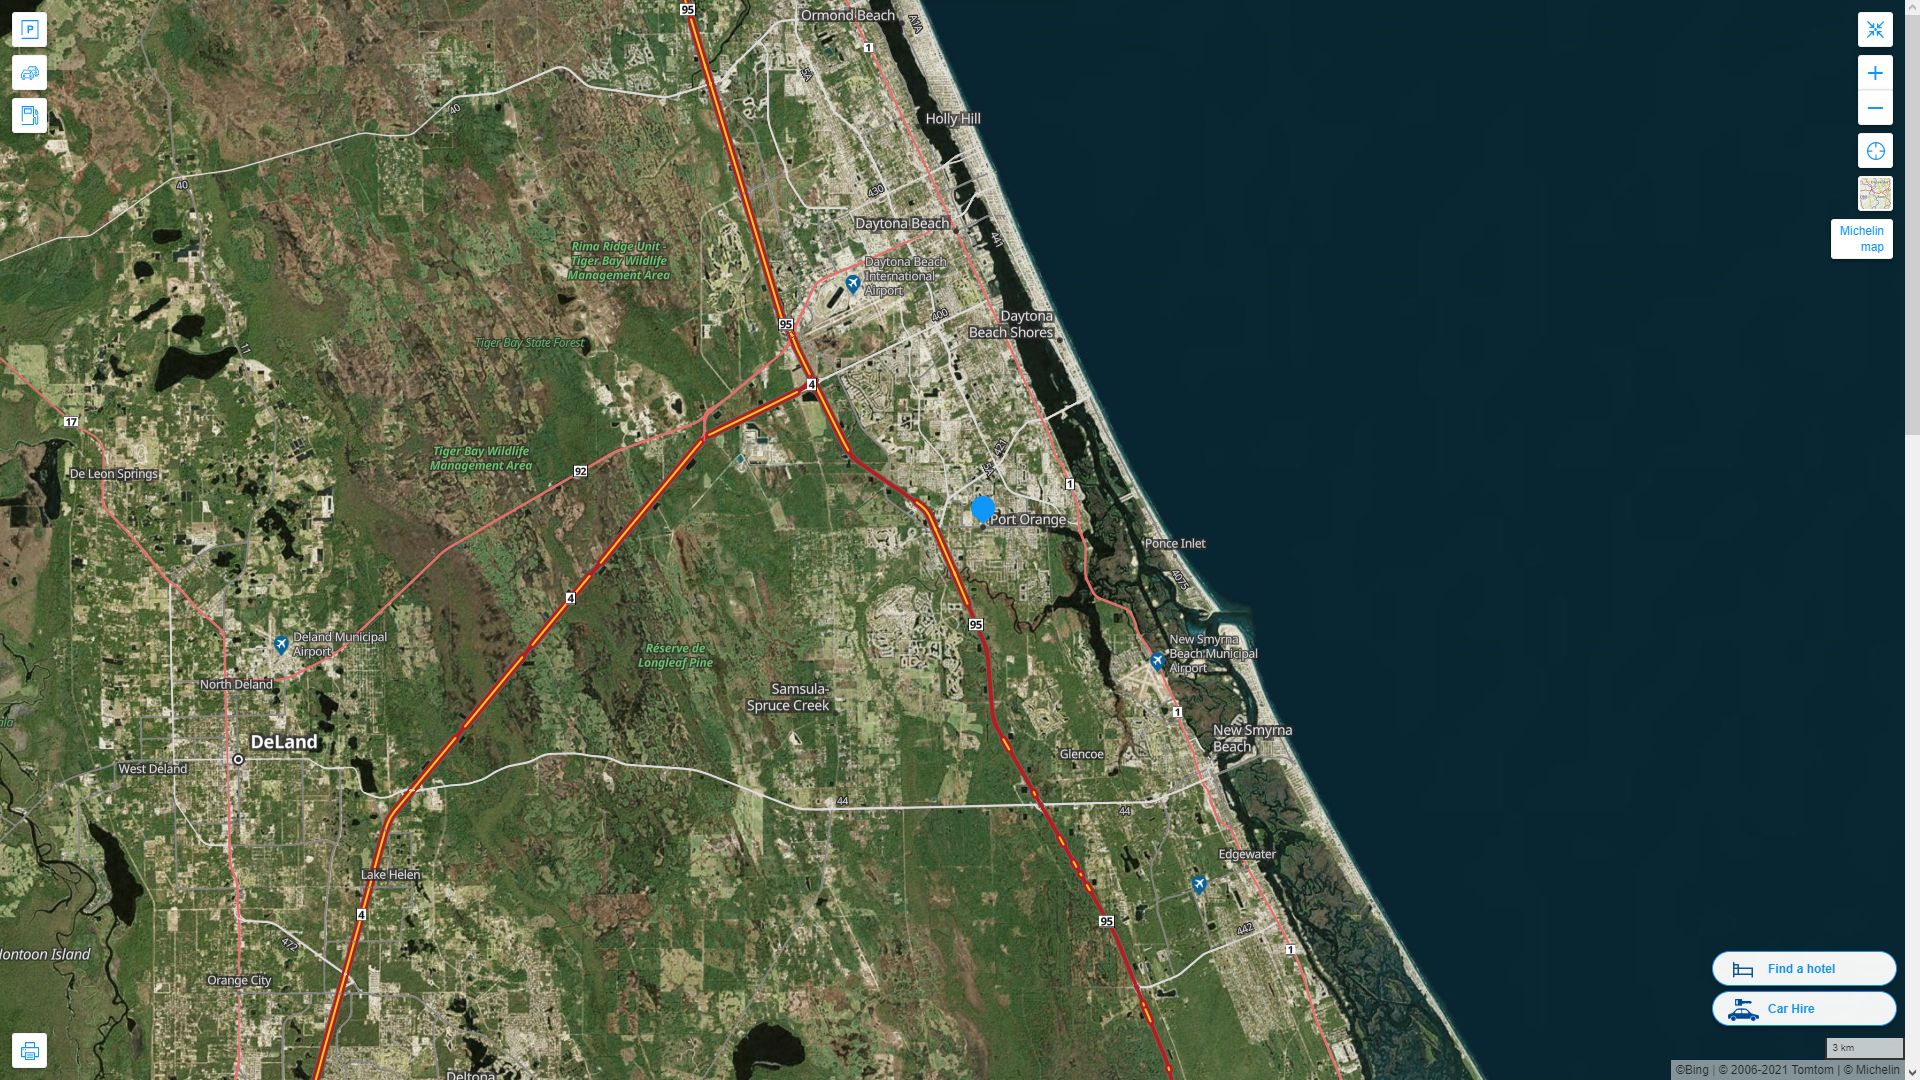 Port Orange Florida Highway and Road Map with Satellite View